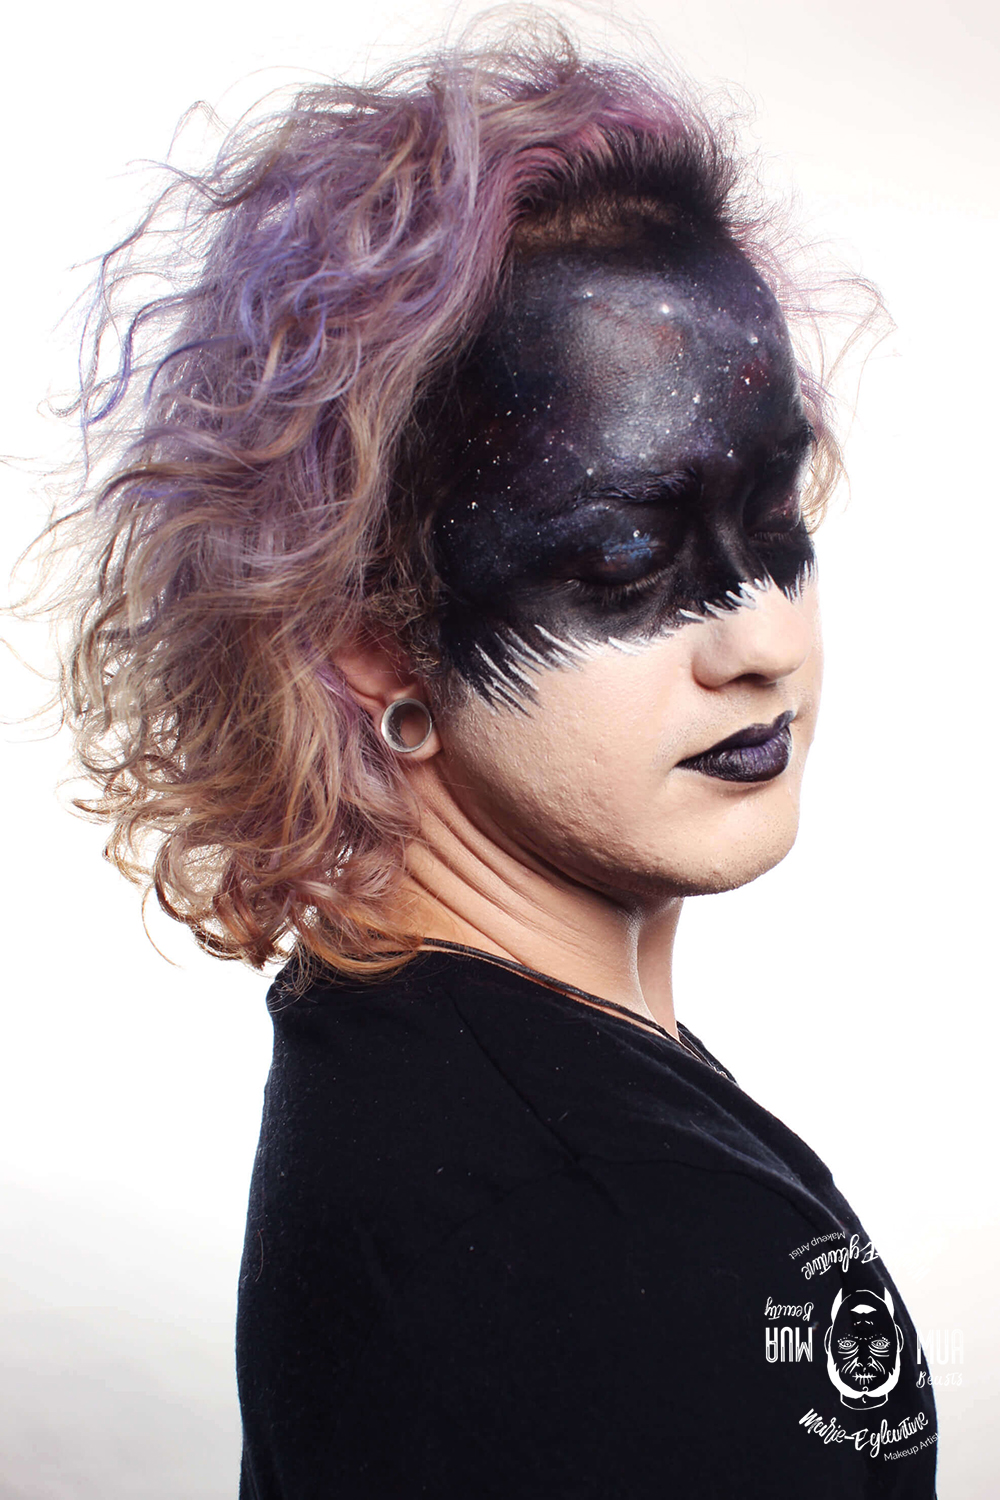 Maquillage artistique inspiration galaxies